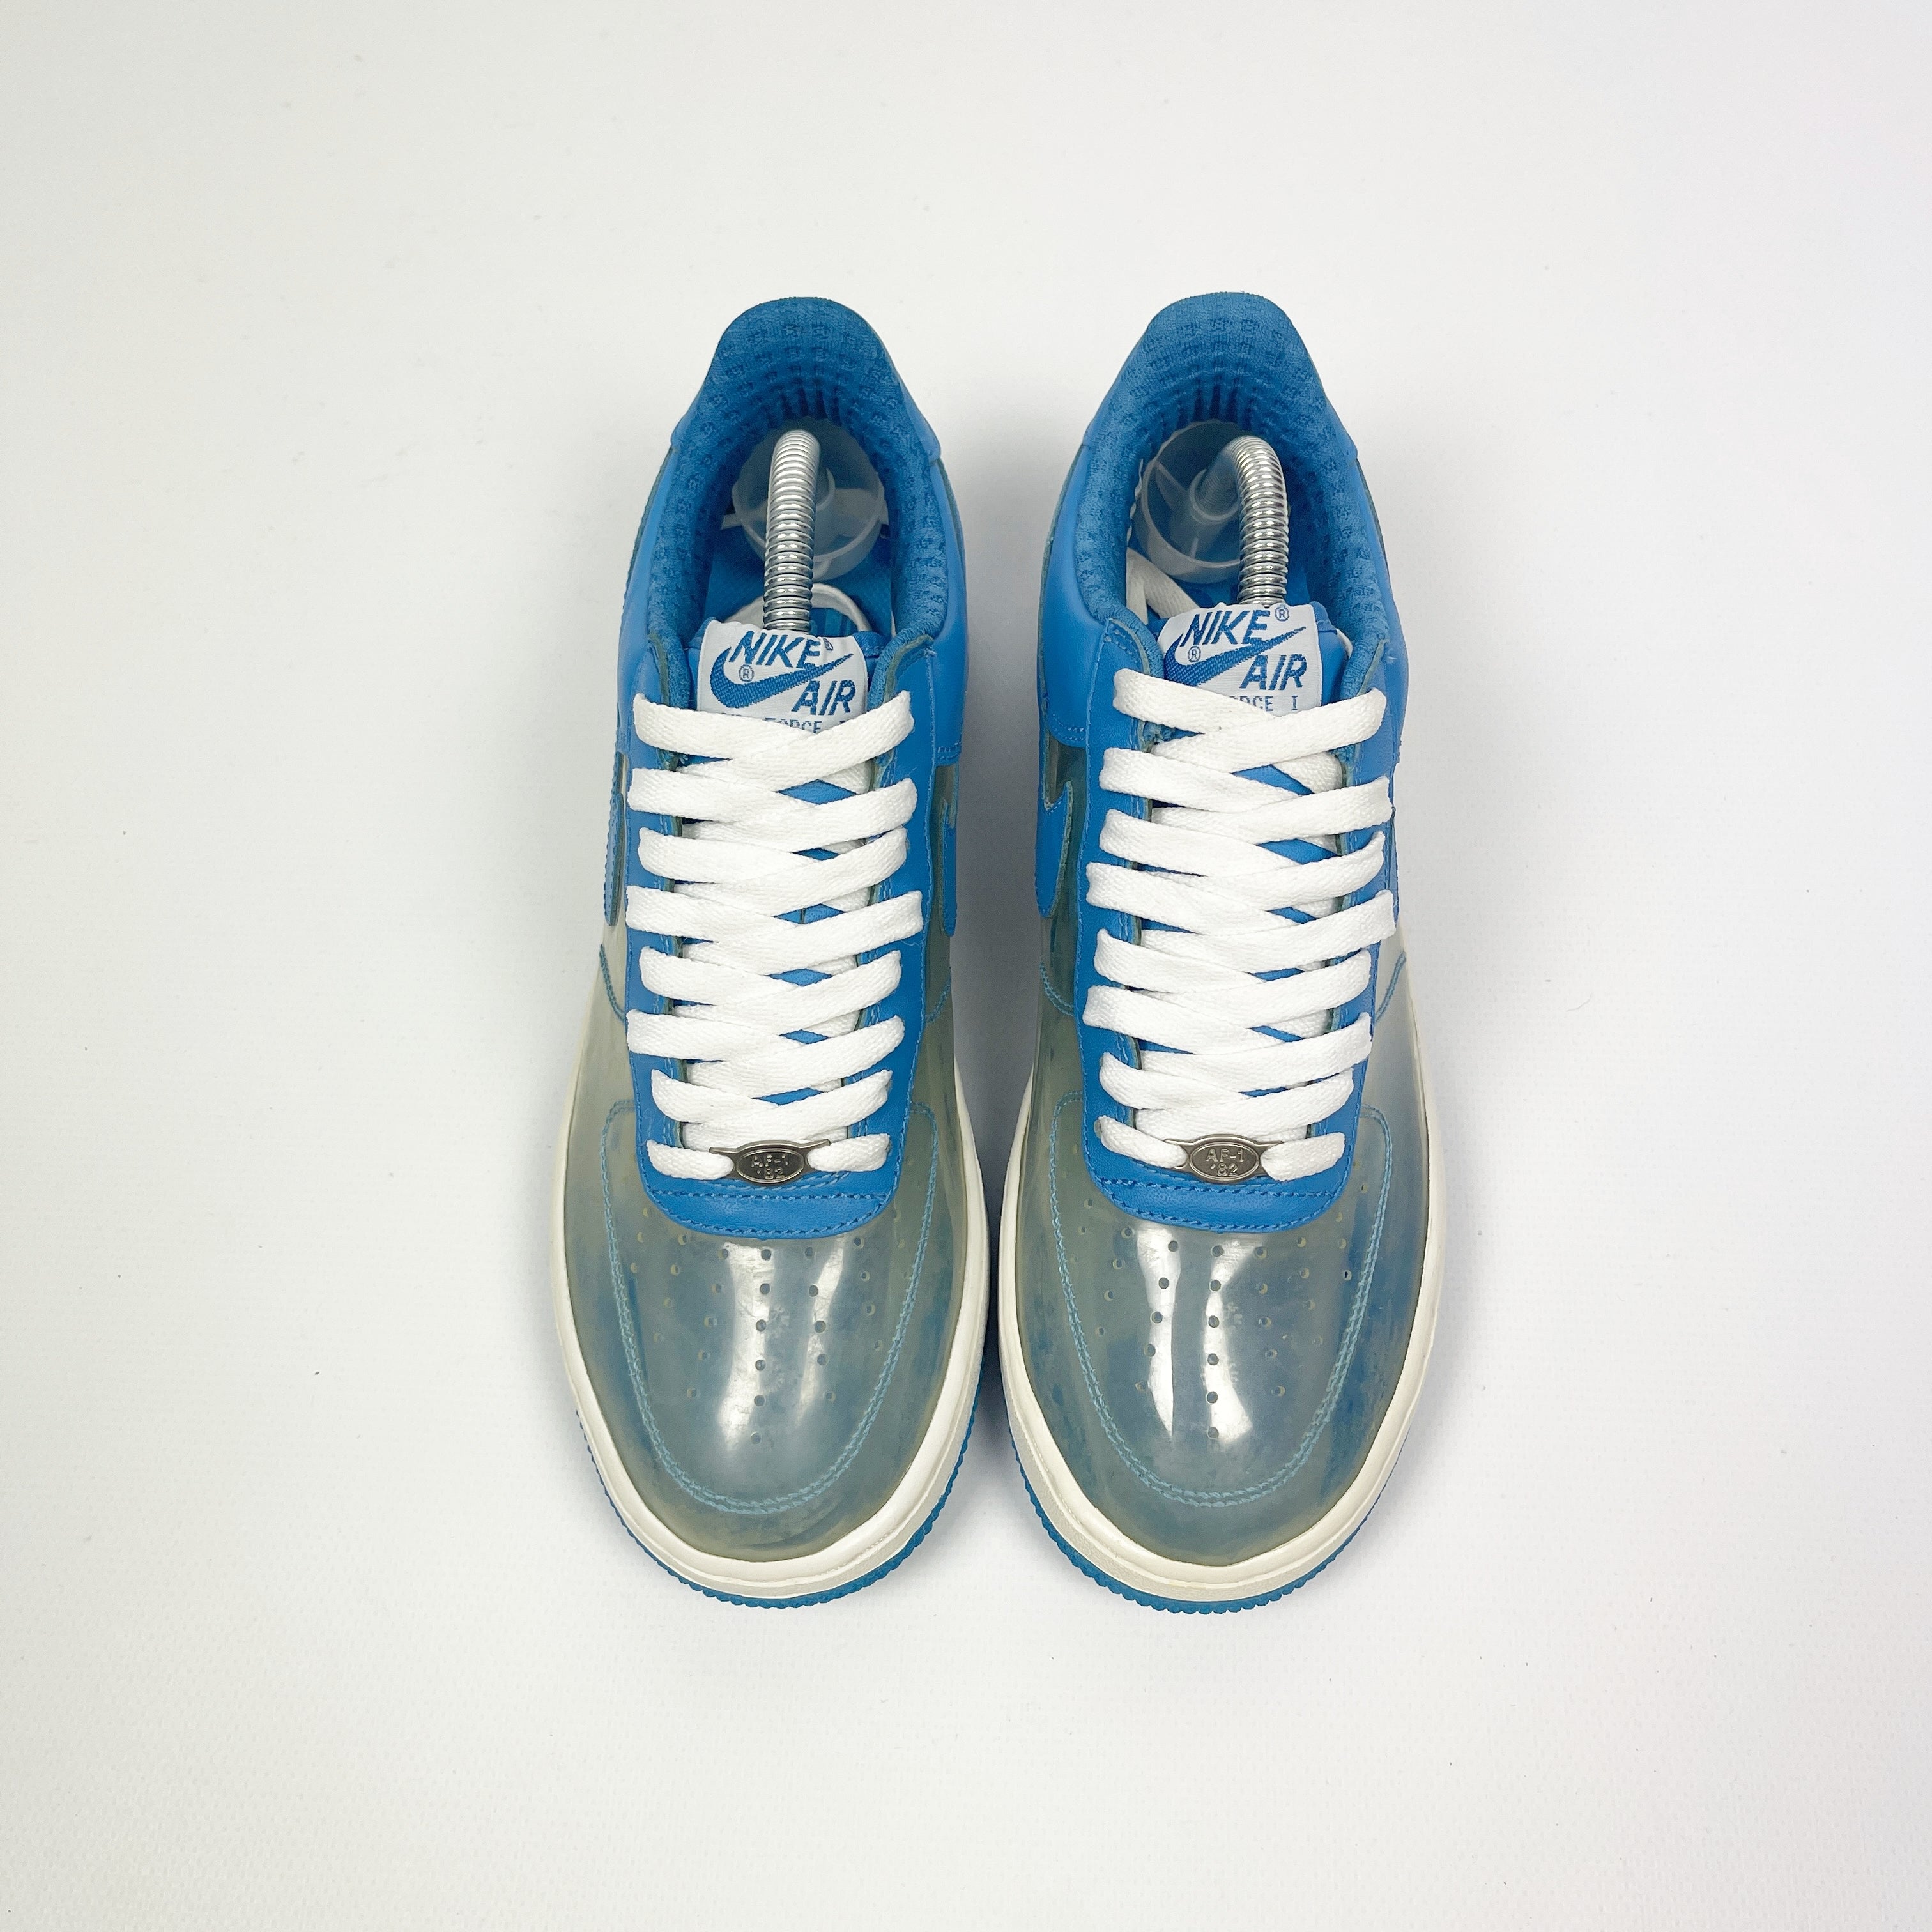 Nike Air Force 1 Low Fantastic 4 Invisible Woman (Women's)